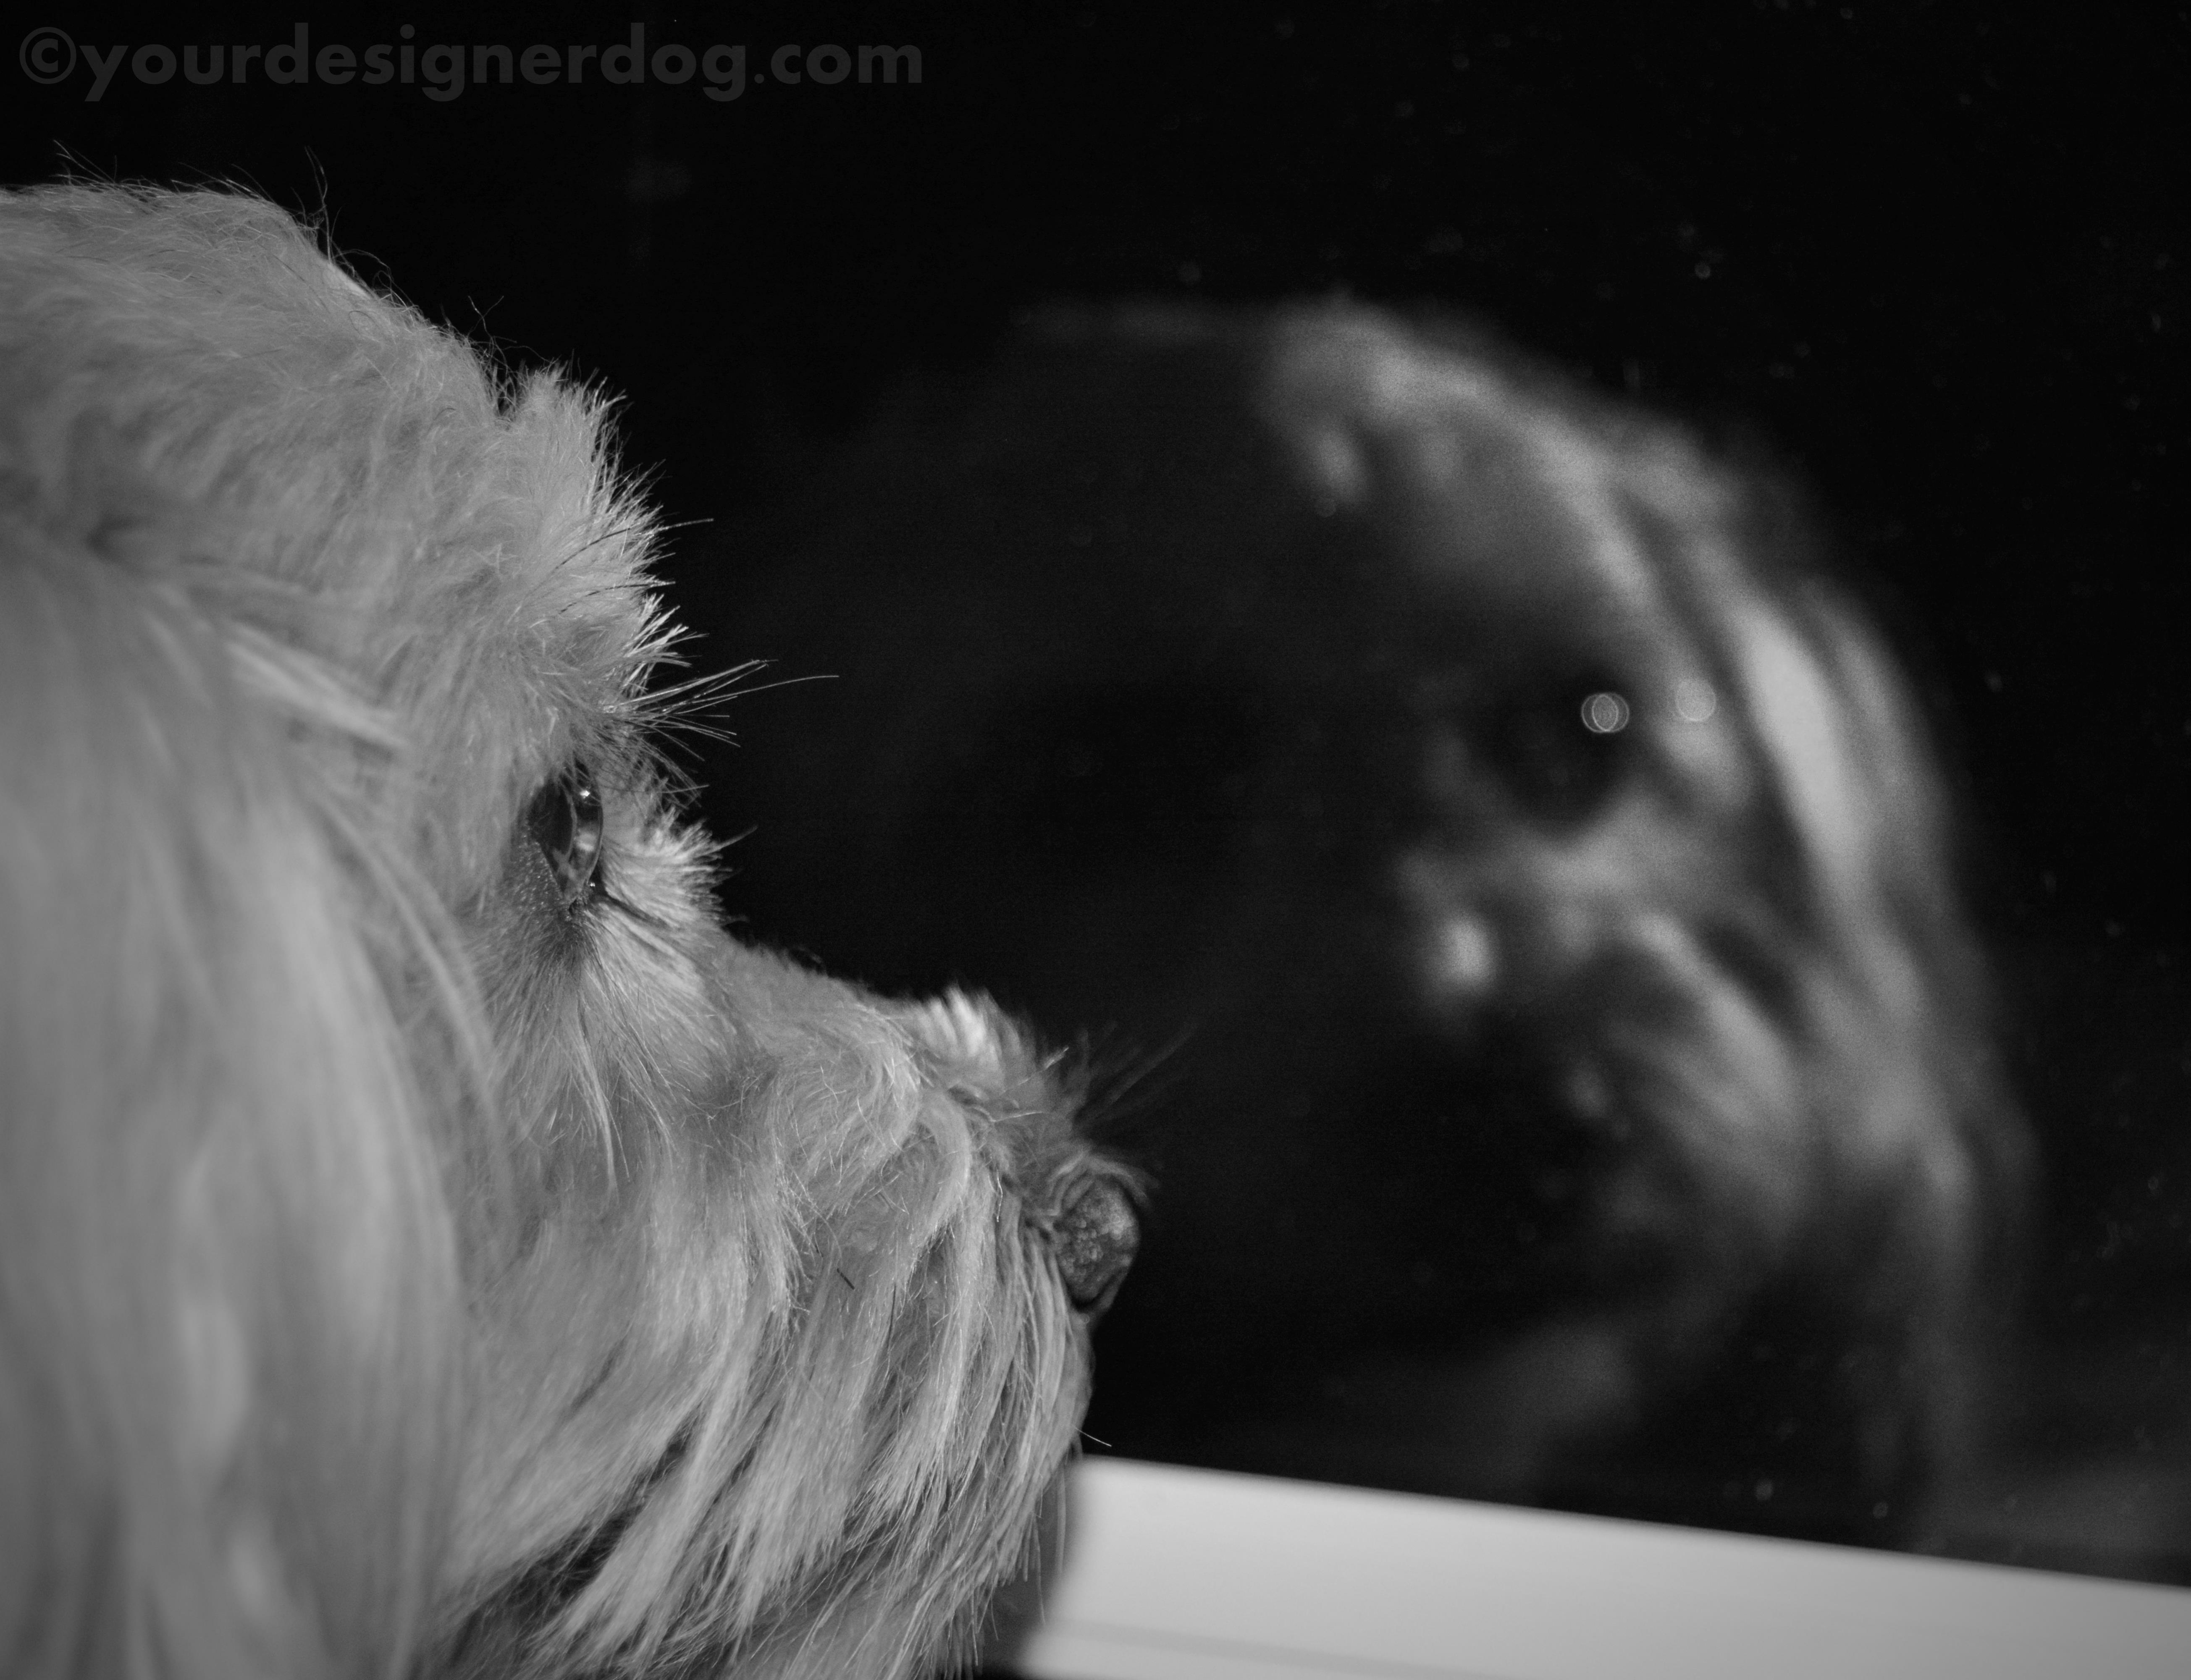 dogs, designer dogs, yorkipoo, yorkie poo, black and white photography, reflection